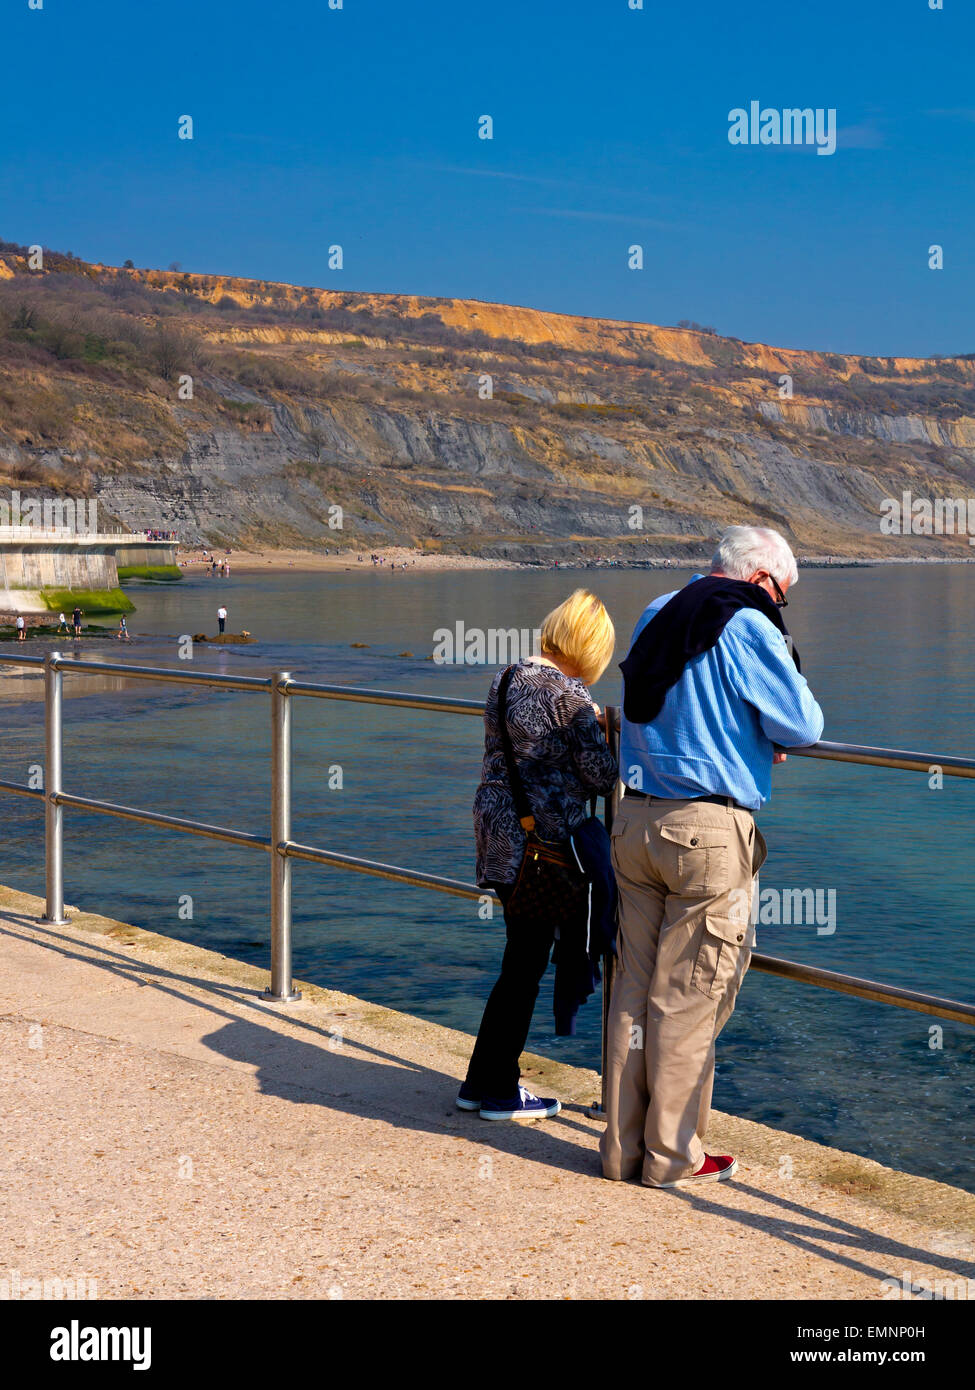 Tourists on the East Cliff coastal wall and sea defences at Lyme Regis Dorset England UK built 2014 to prevent coastal erosion Stock Photo